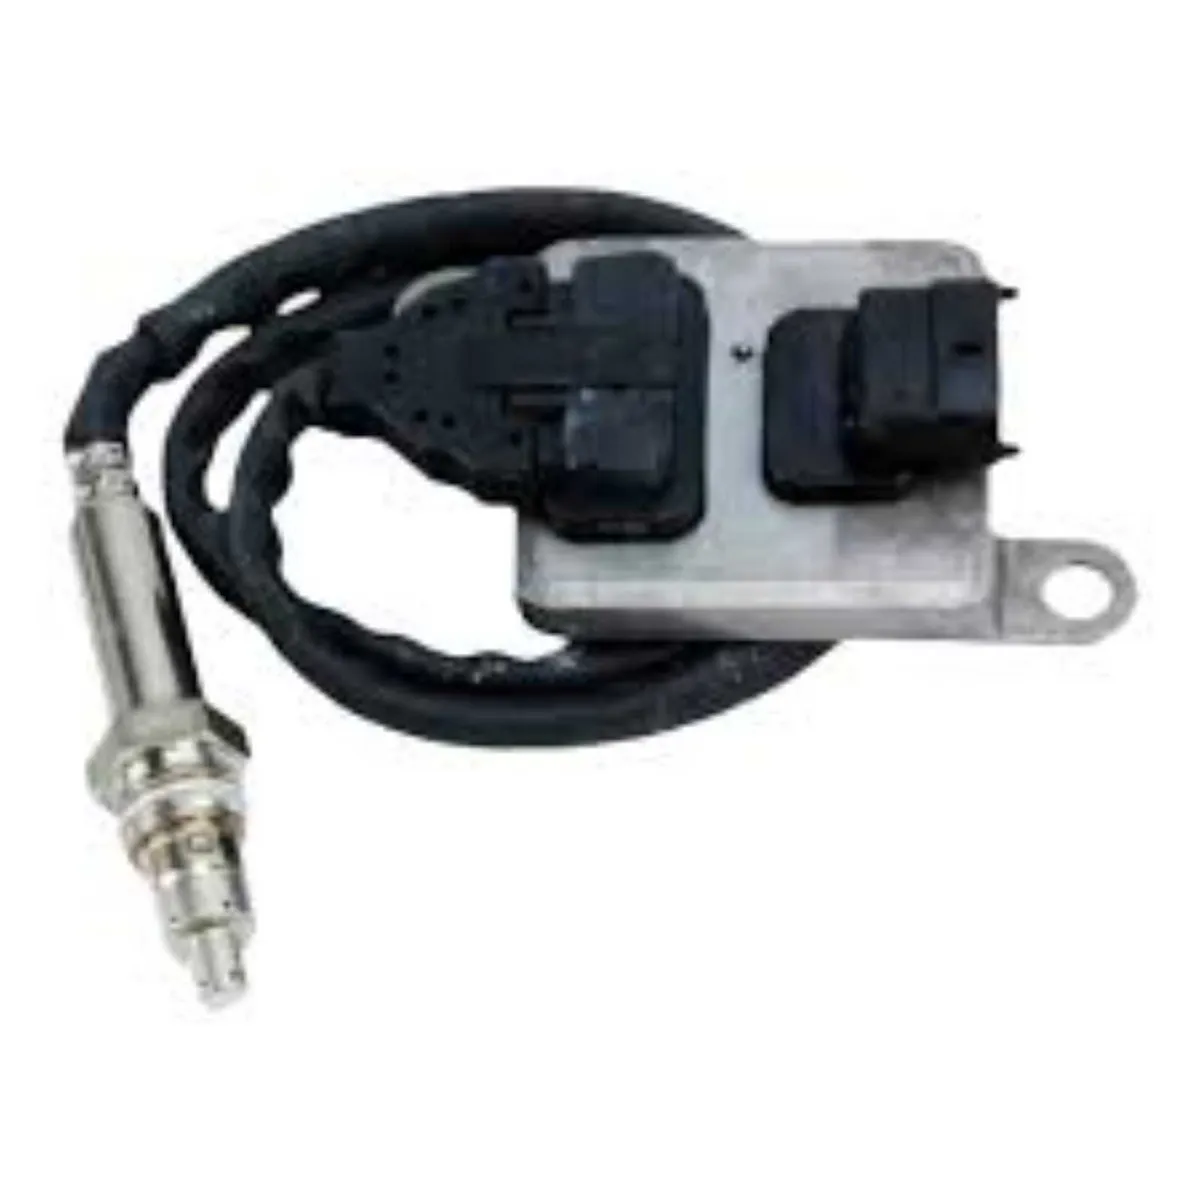 NOX SENSORS & EXHAUST SYSTEMS FOR VOLVO & SCANIA